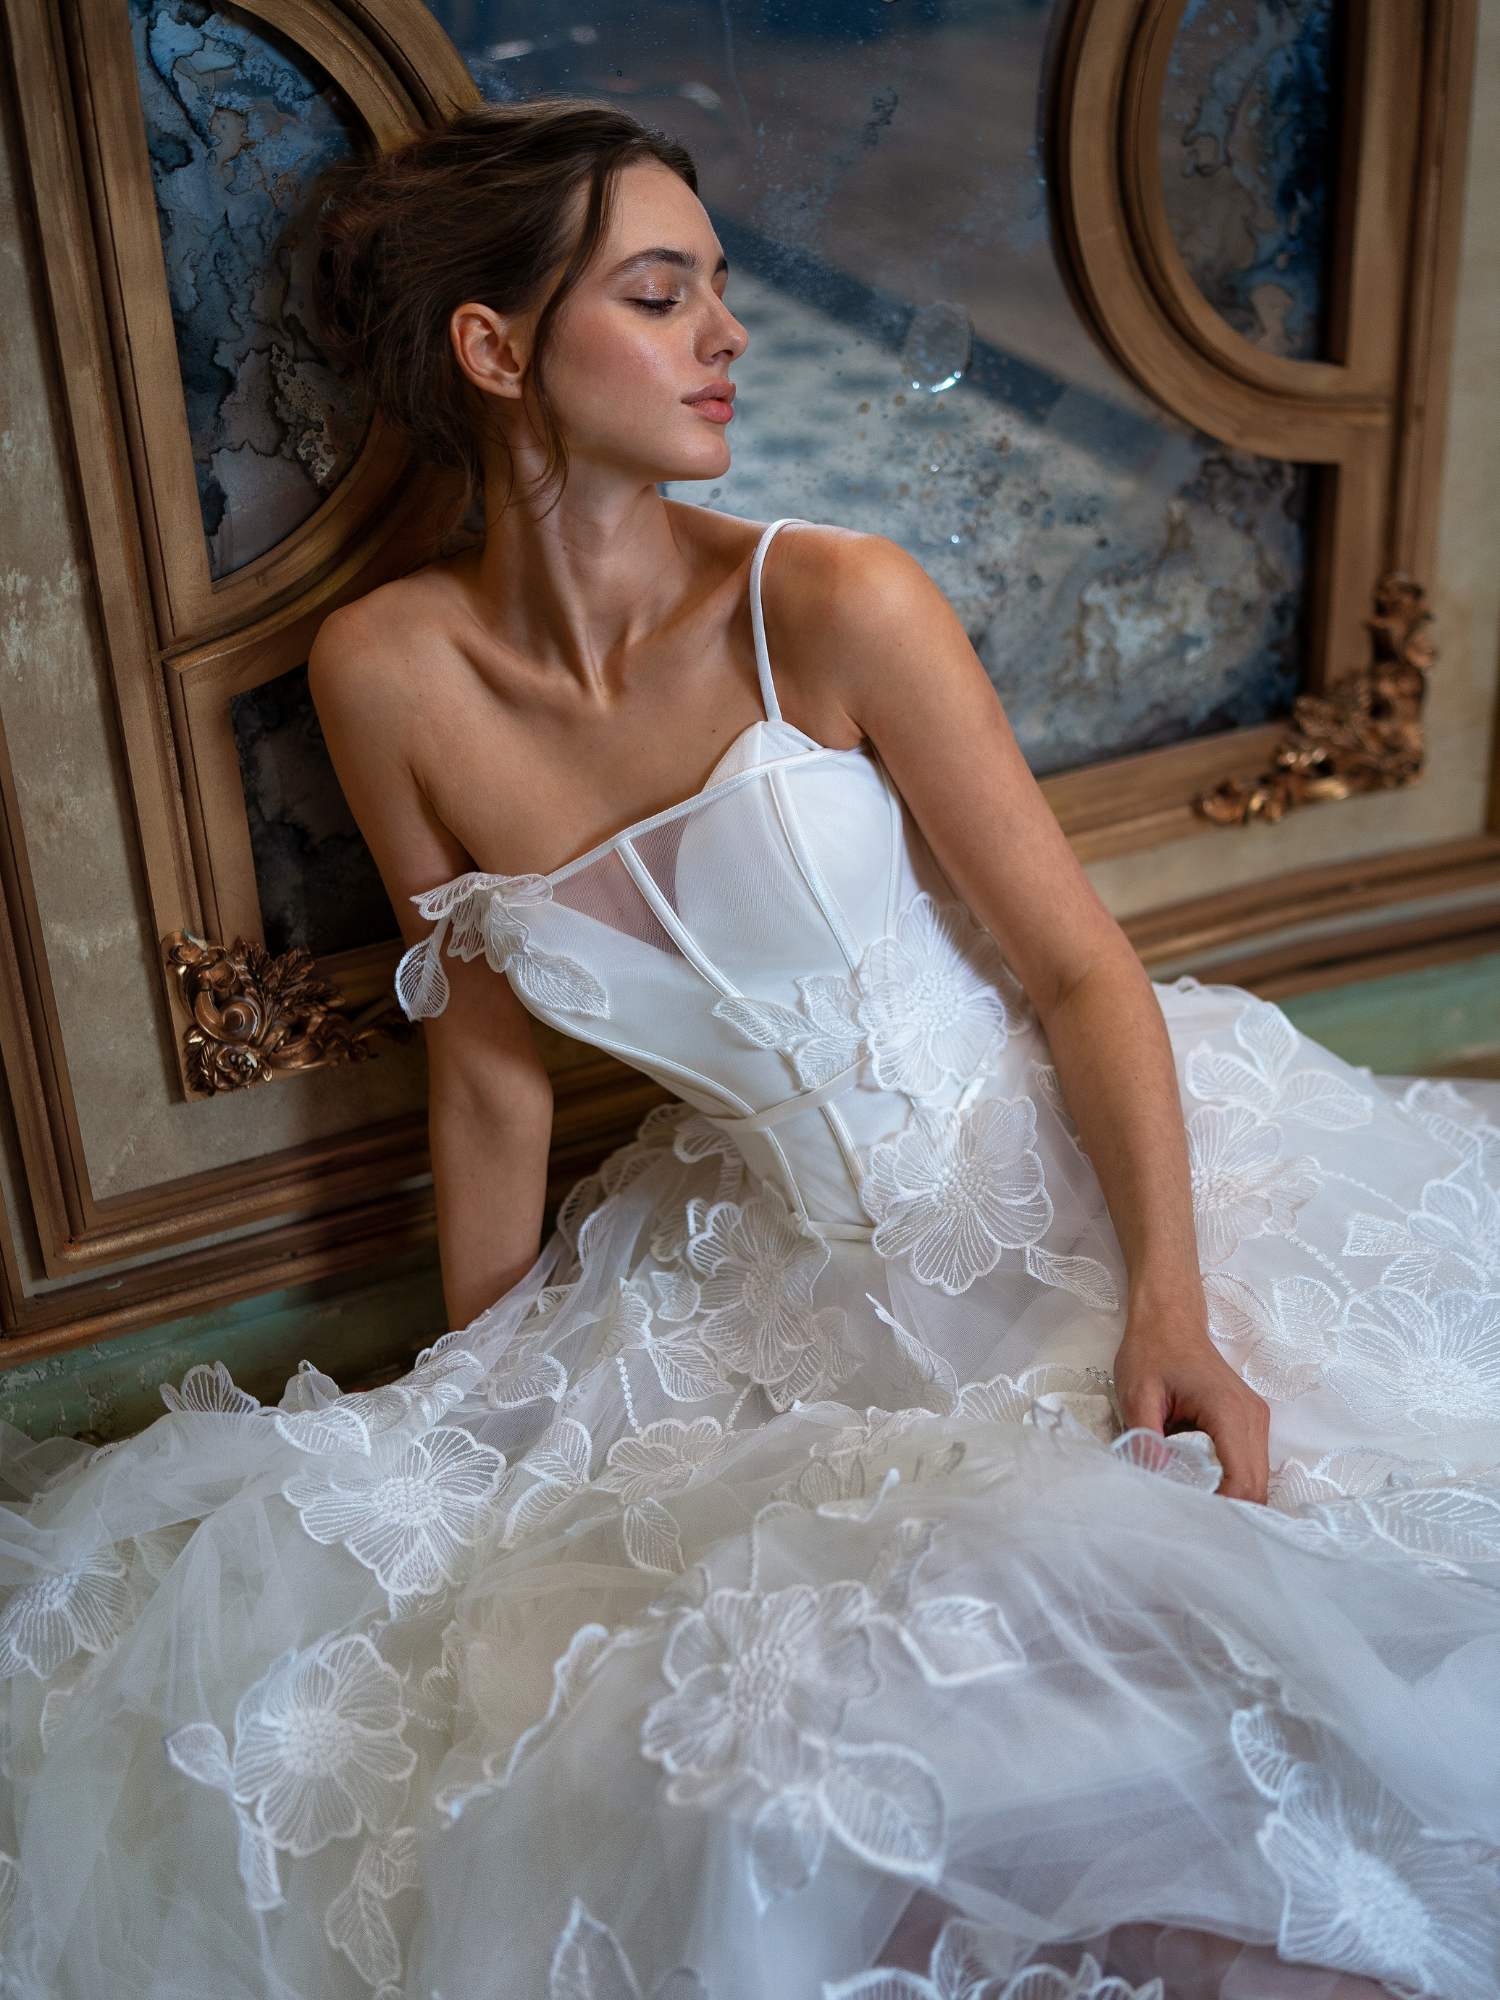 A serene bride gazes downward while seated, draped in an ethereal white gown with delicate floral embroidery, similar to one of the exquisite finds at Papilio's sample sale in Toronto for wedding dresses, surrounded by a room rich in vintage charm and ornate details.